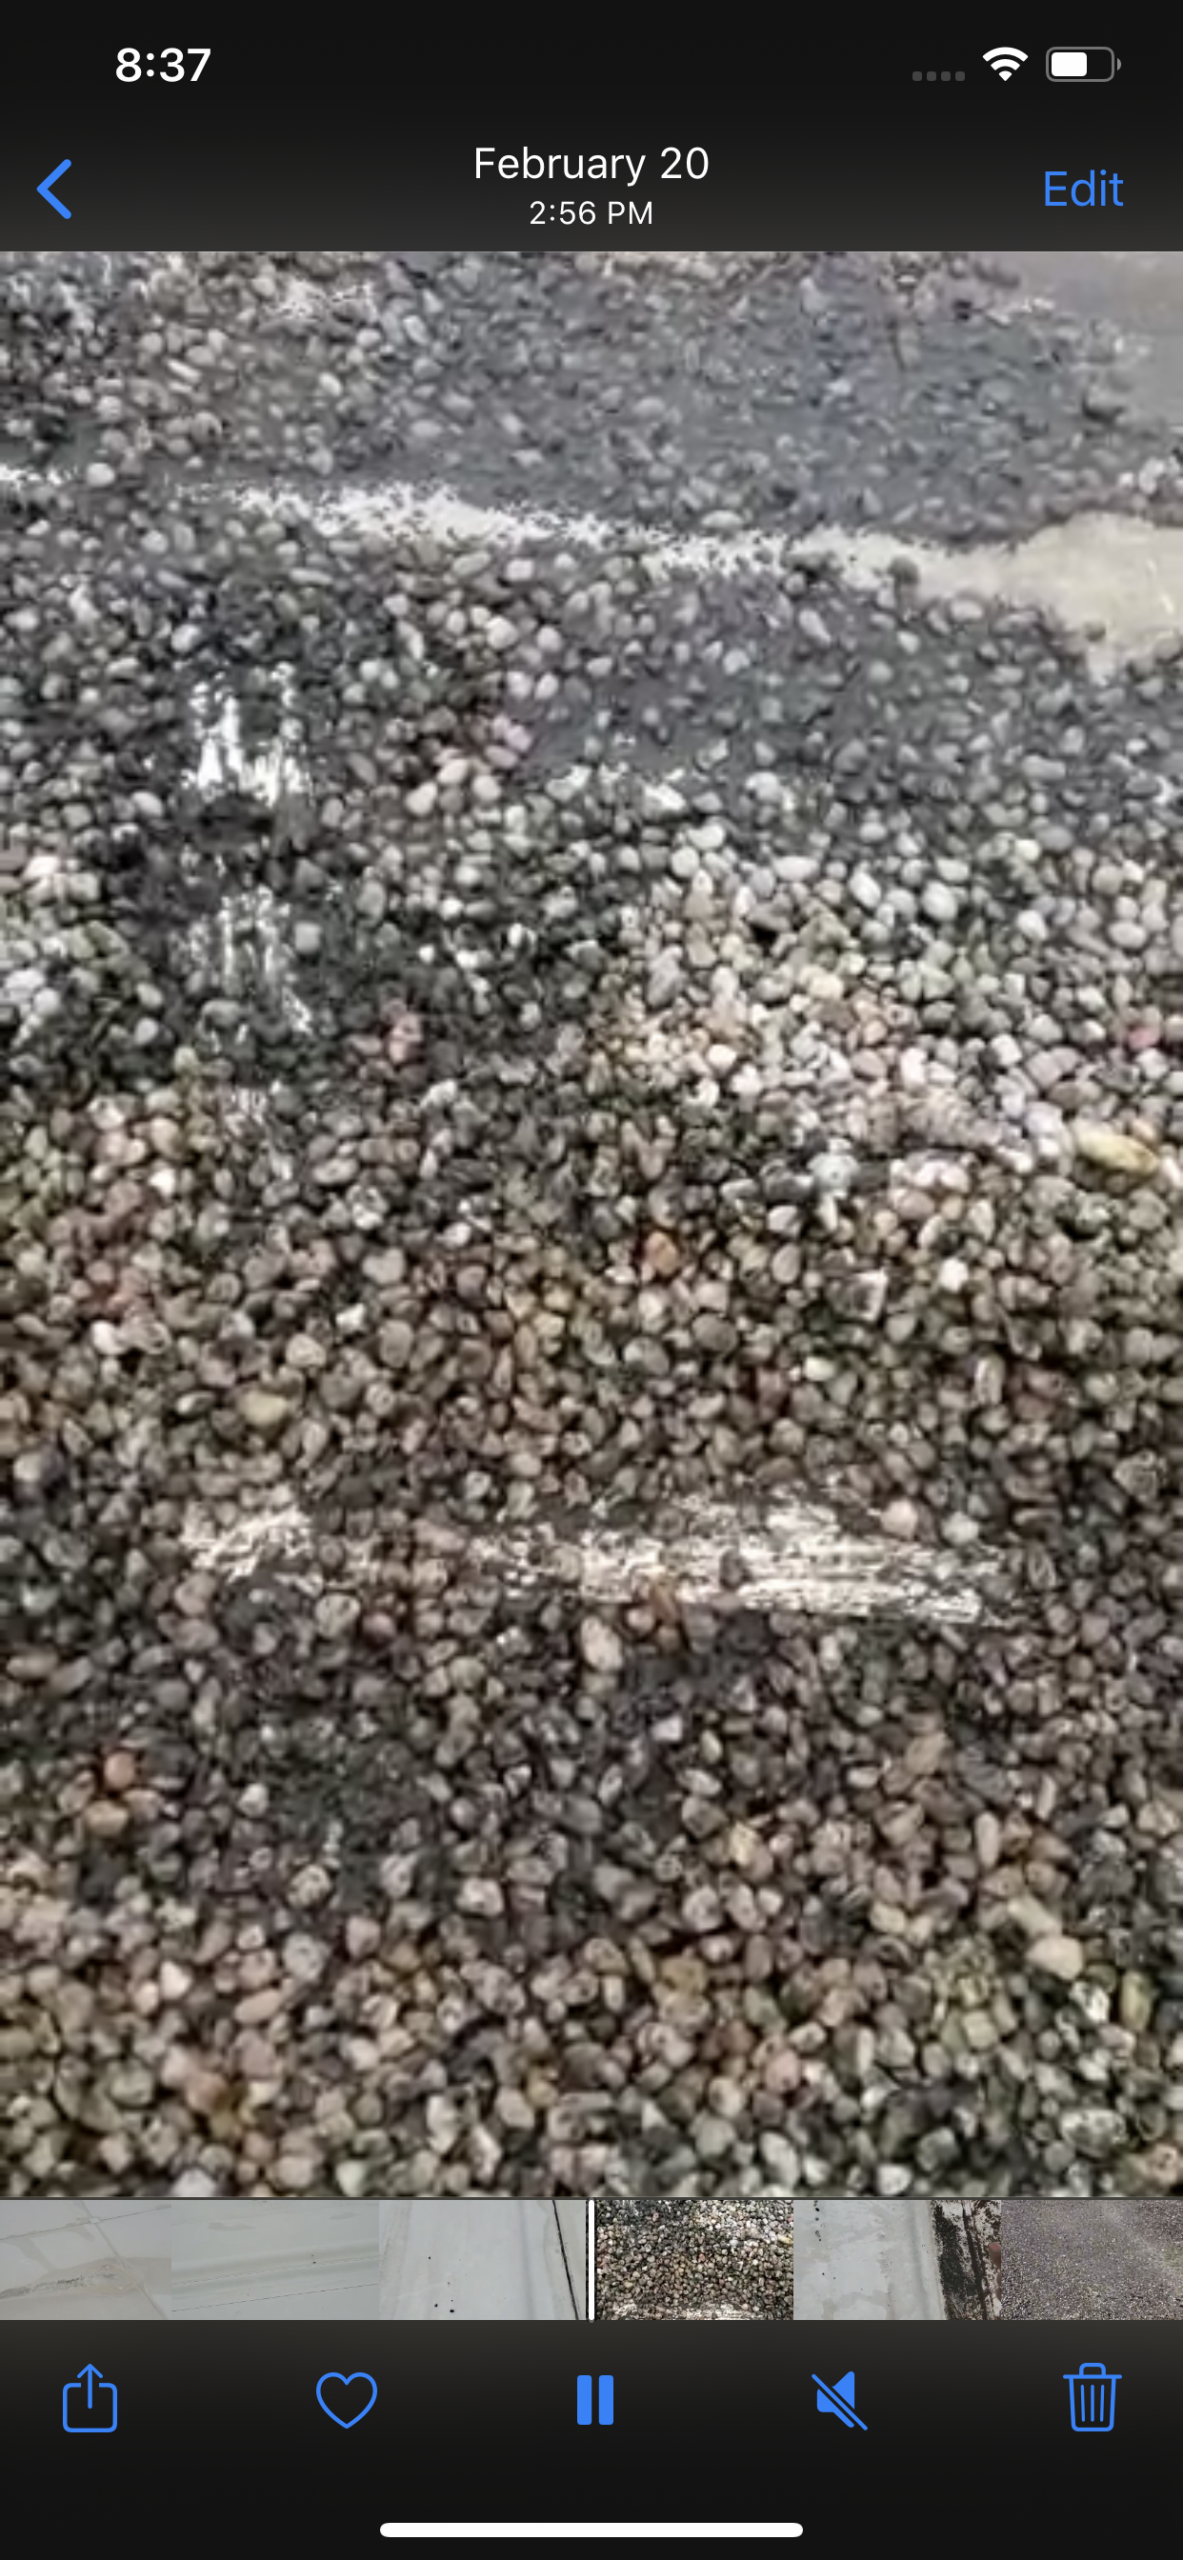 This is a close up image of a chip and gravel portion of the roof. 